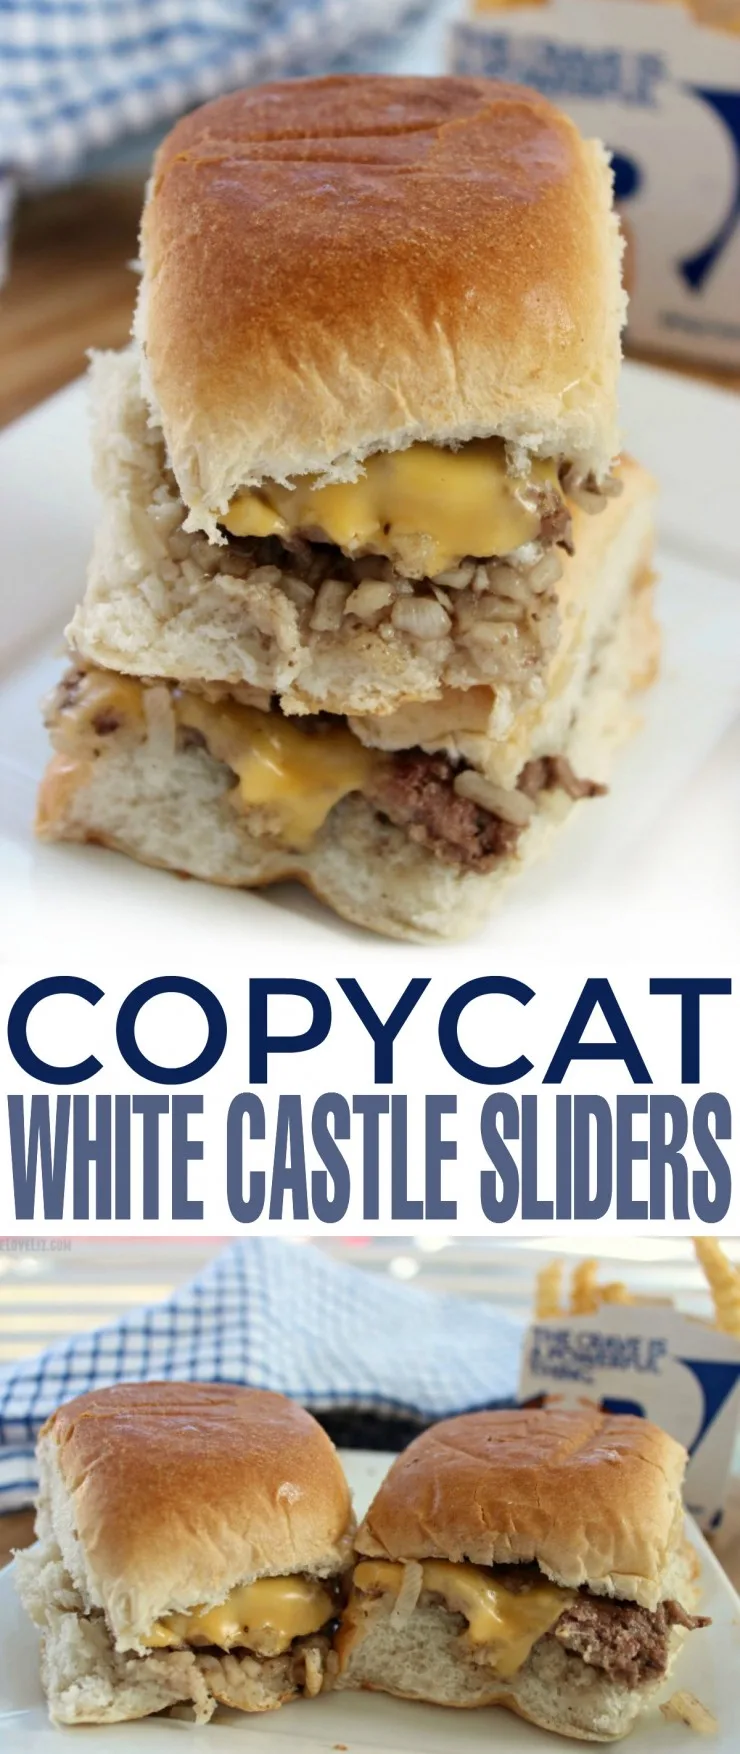  Copycat White Castle Sliders that taste so authentic you'll be looking around for Harold and Kumar. 